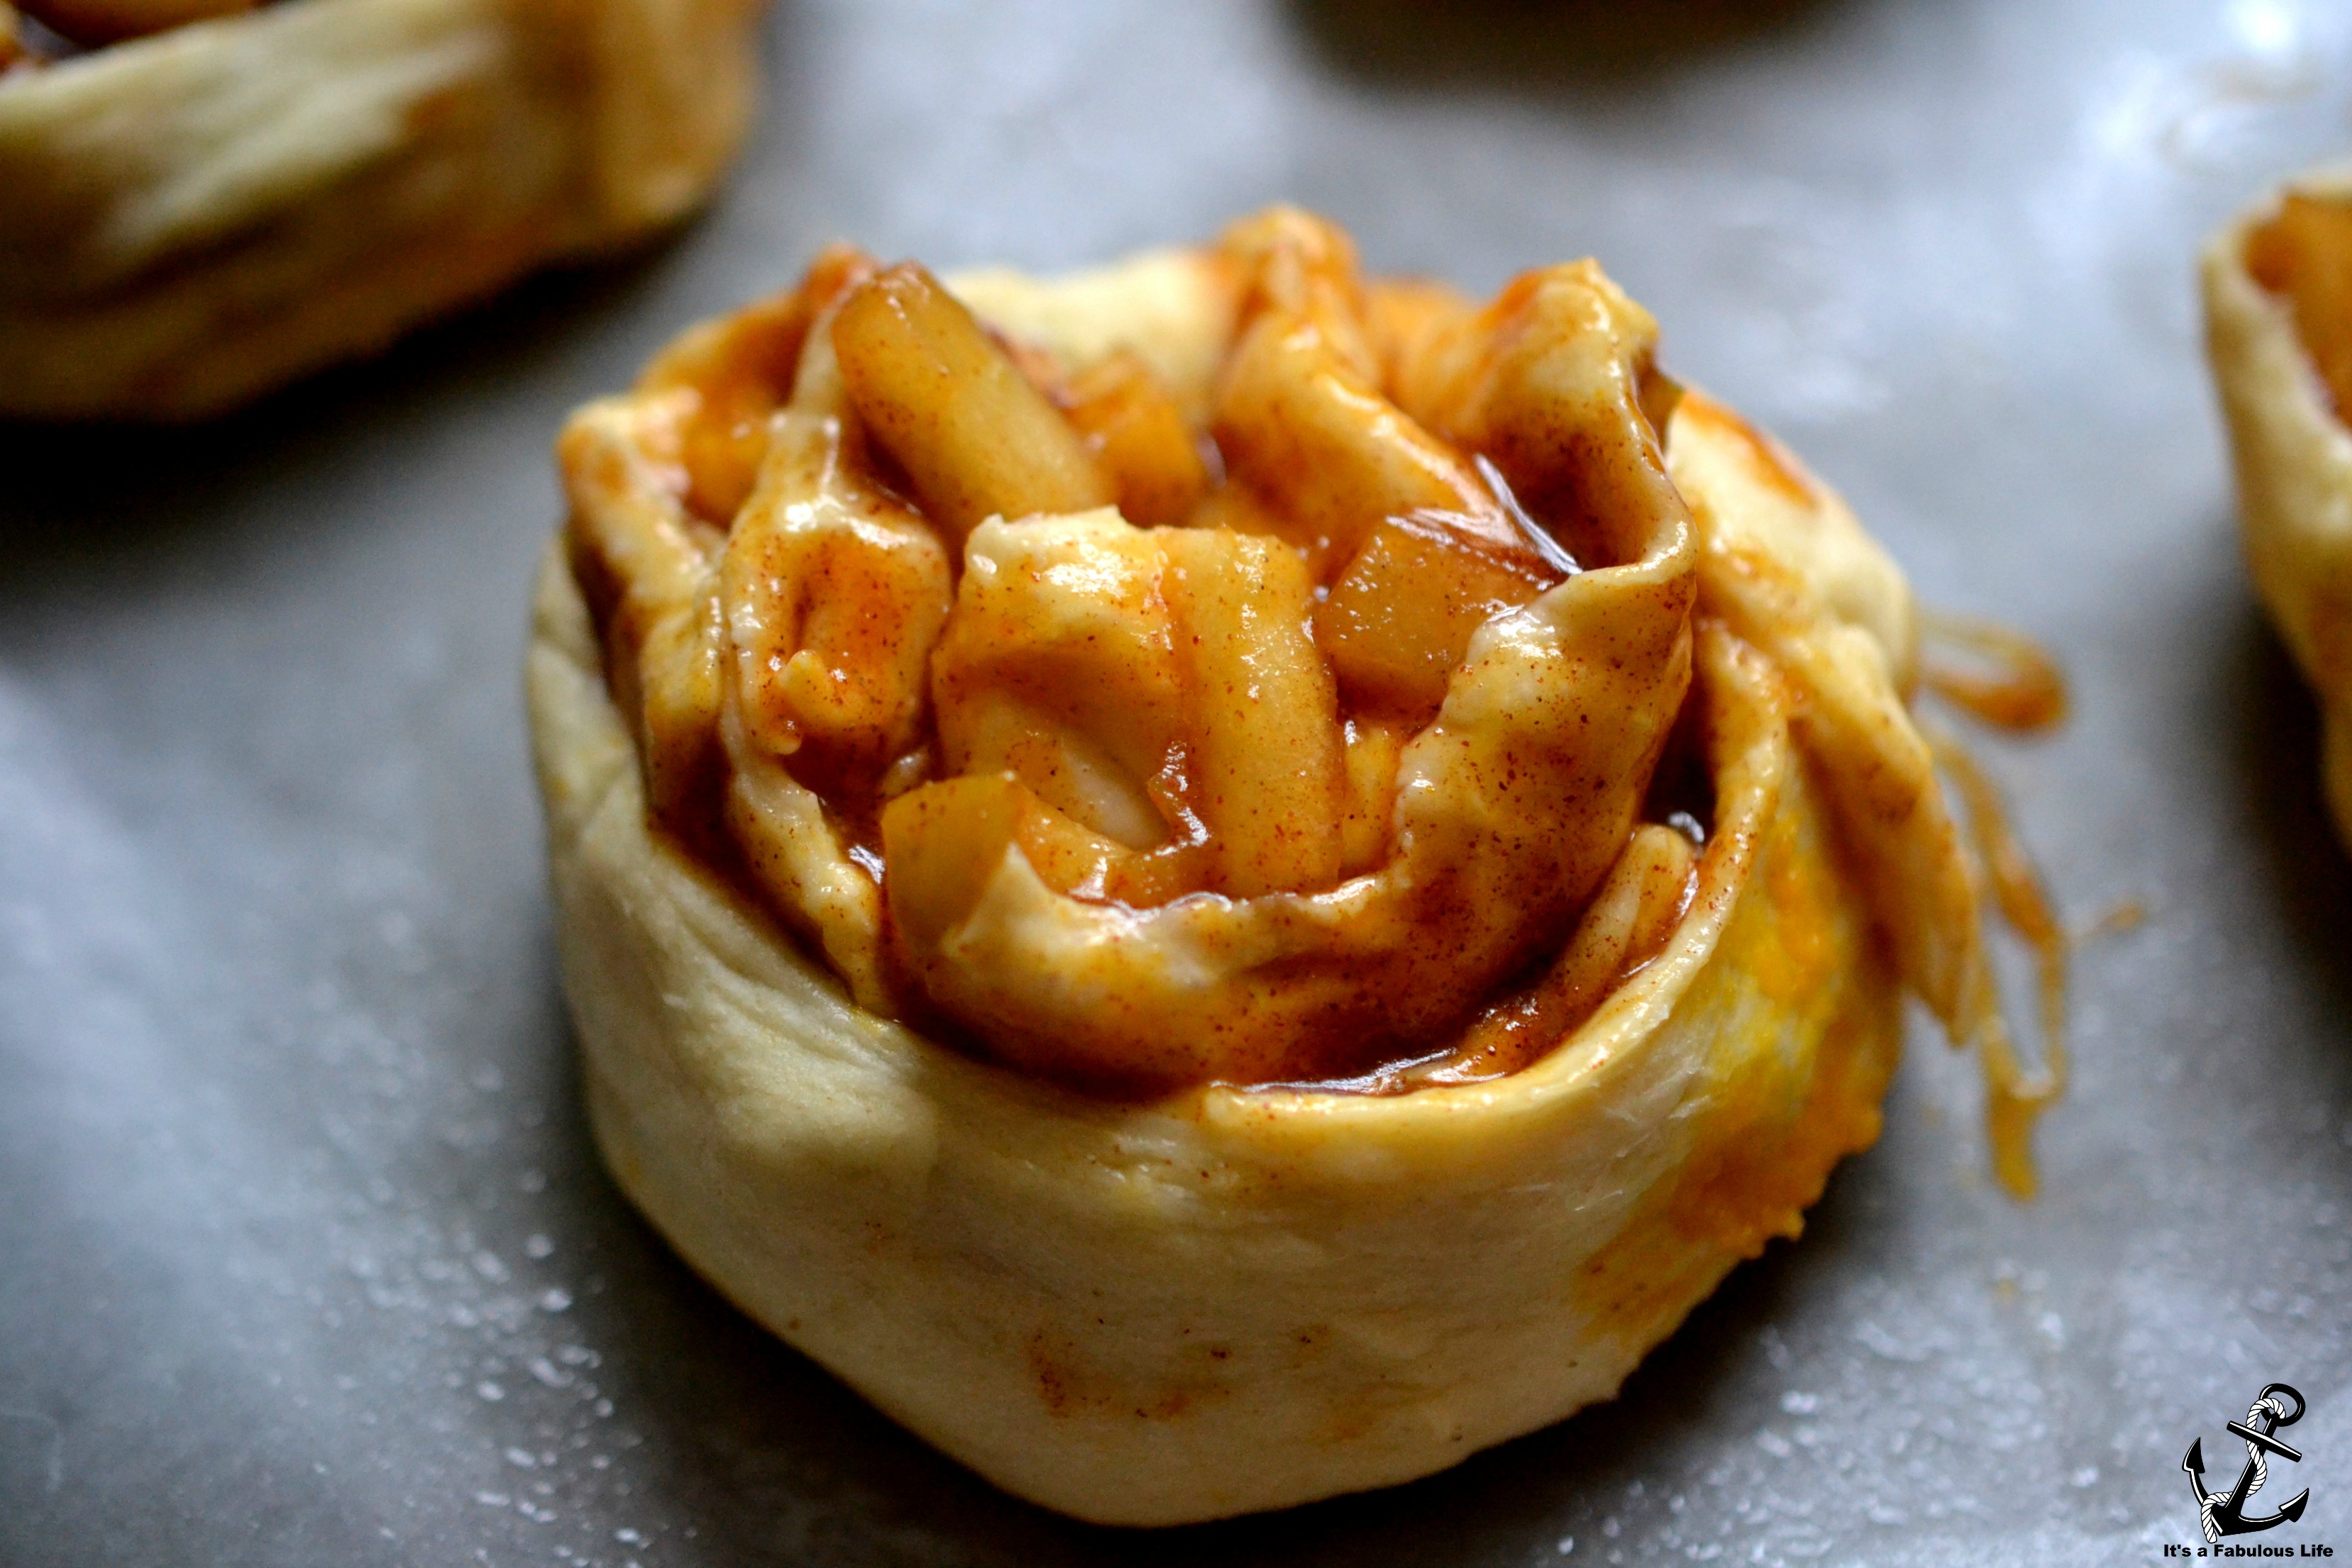 Just made these Apple Pumpkin Cinnamon Rolls with Caramel Frosting .... OH MY GOSH!! SO good!  And REALLY quick and easy!  Pinning so I don't lose this recipe!!